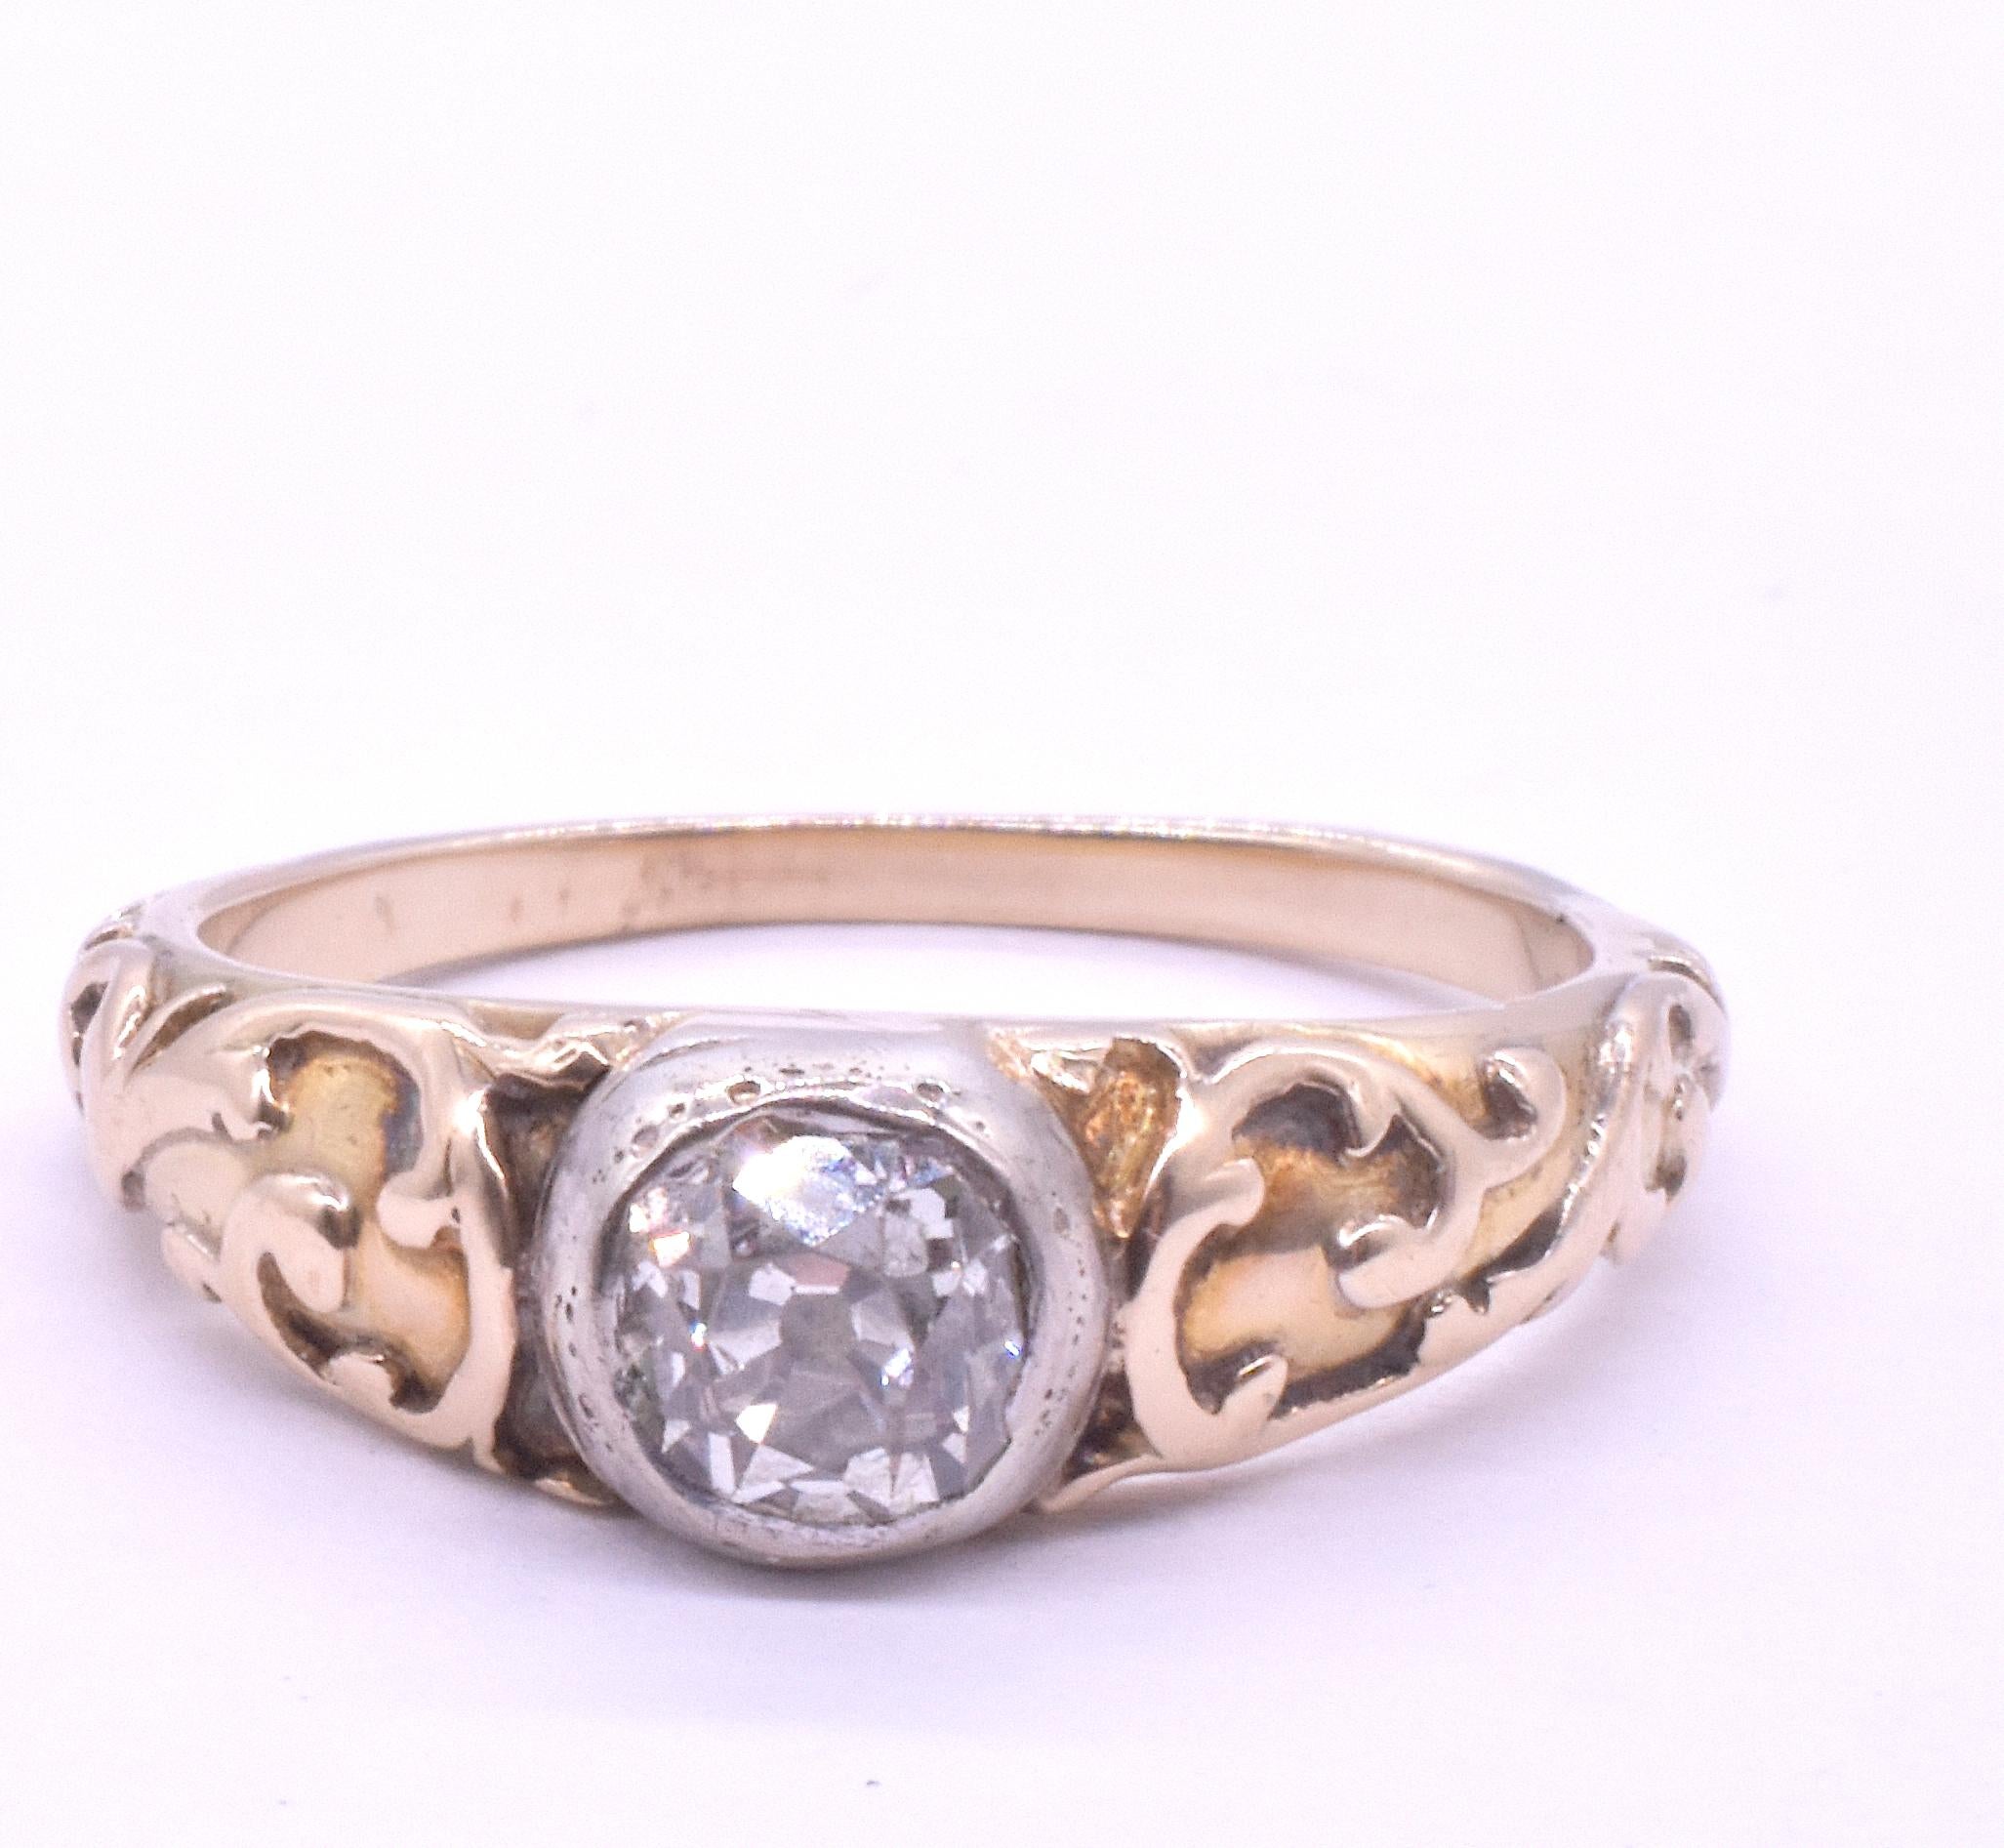 15K Georgian Period Diamond Solitaire Ring with Engraved Shoulders 3